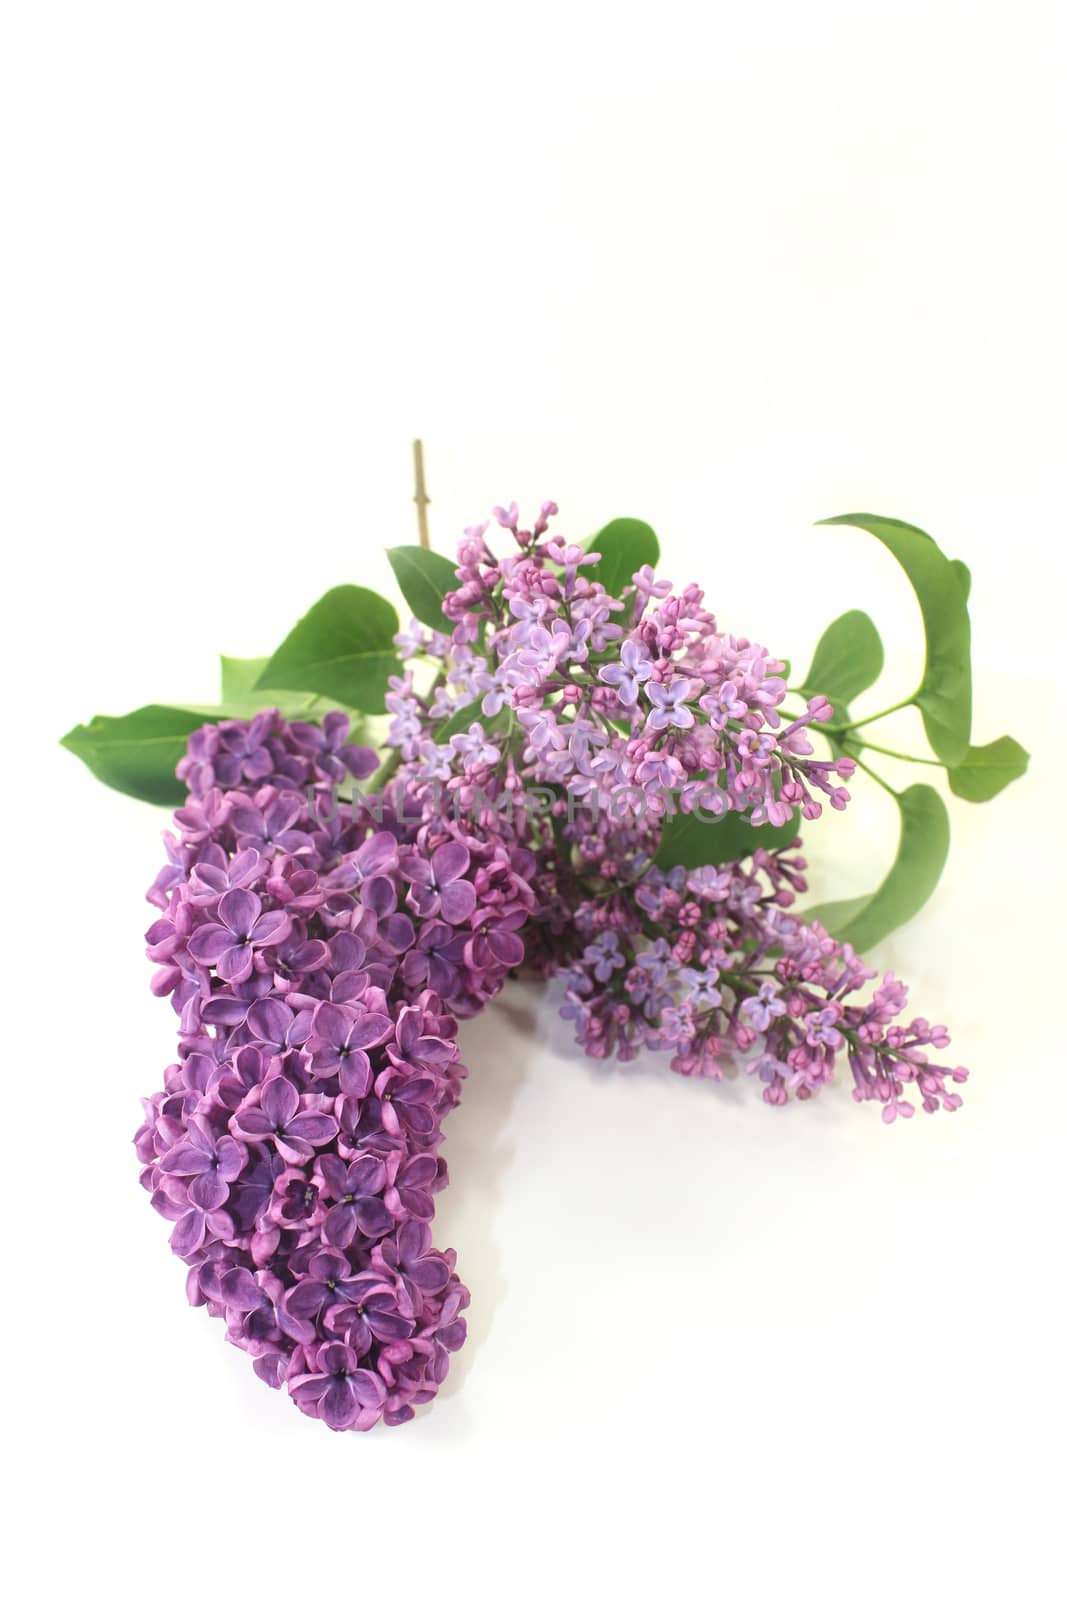 Purple Lilac flowers on a white background